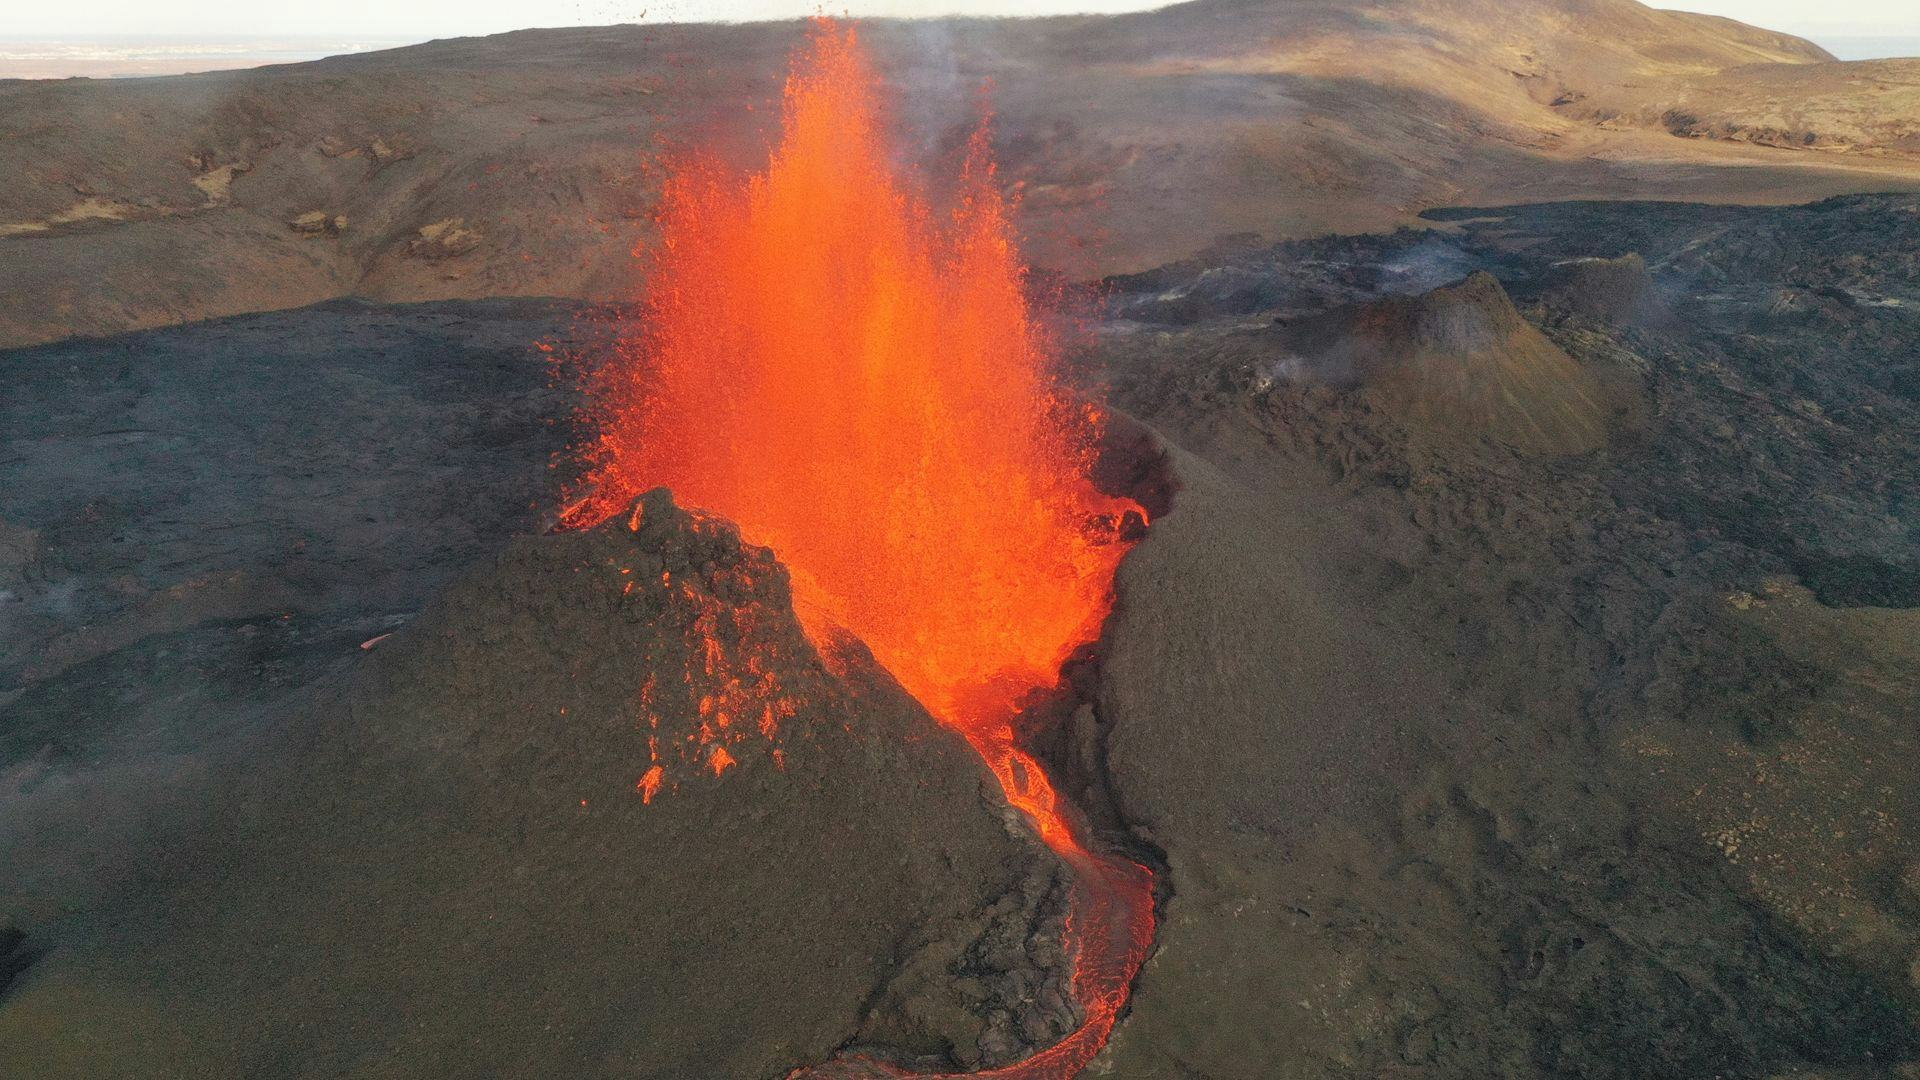 A volcanic eruption with bright orange lava spewing from a fissure on a ruged landscape